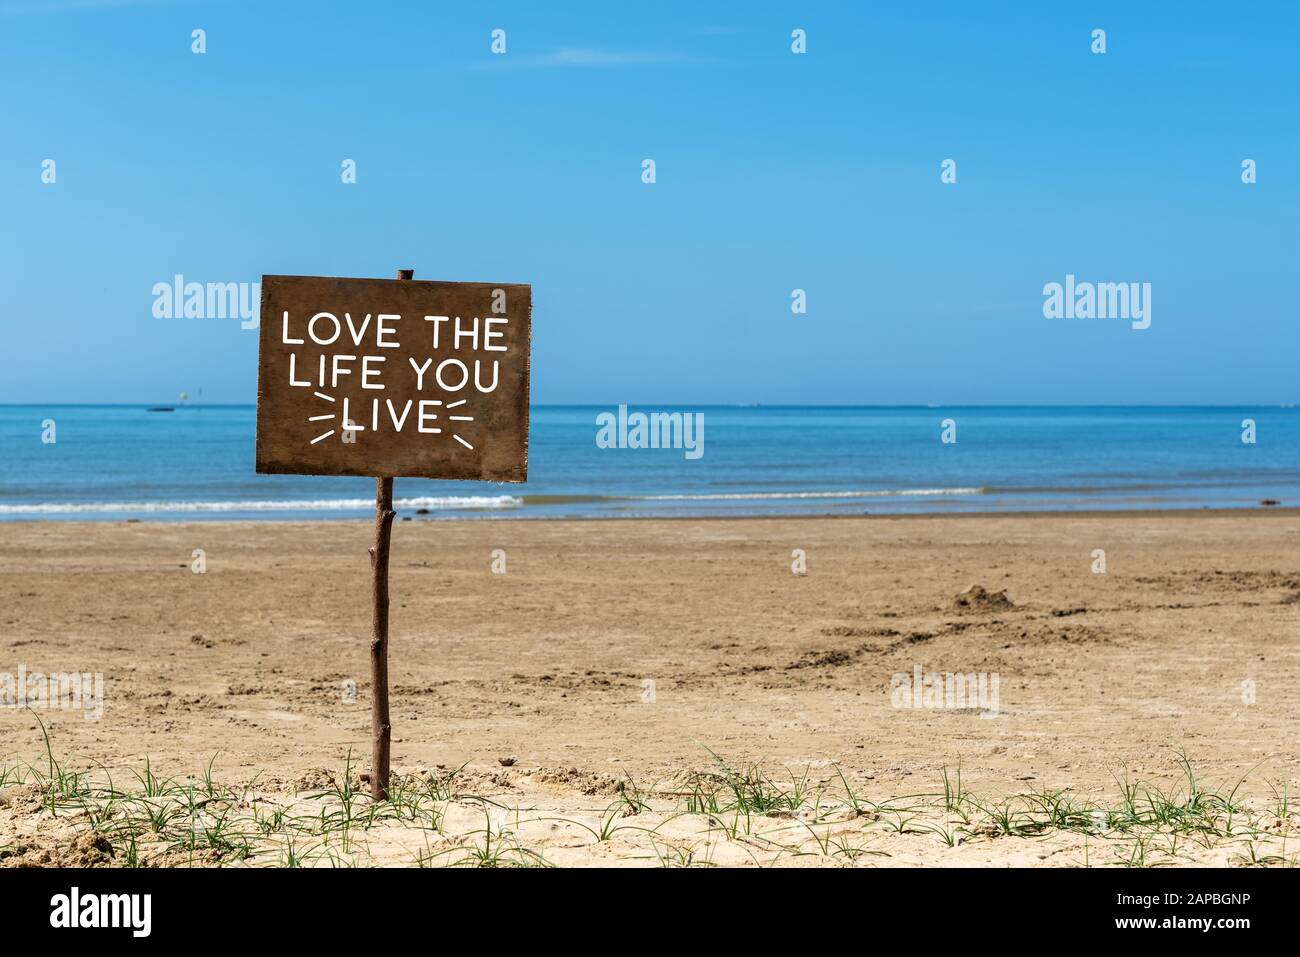 Motivational and Life Inspirational Quotes - Love the life you live. Stock Photo